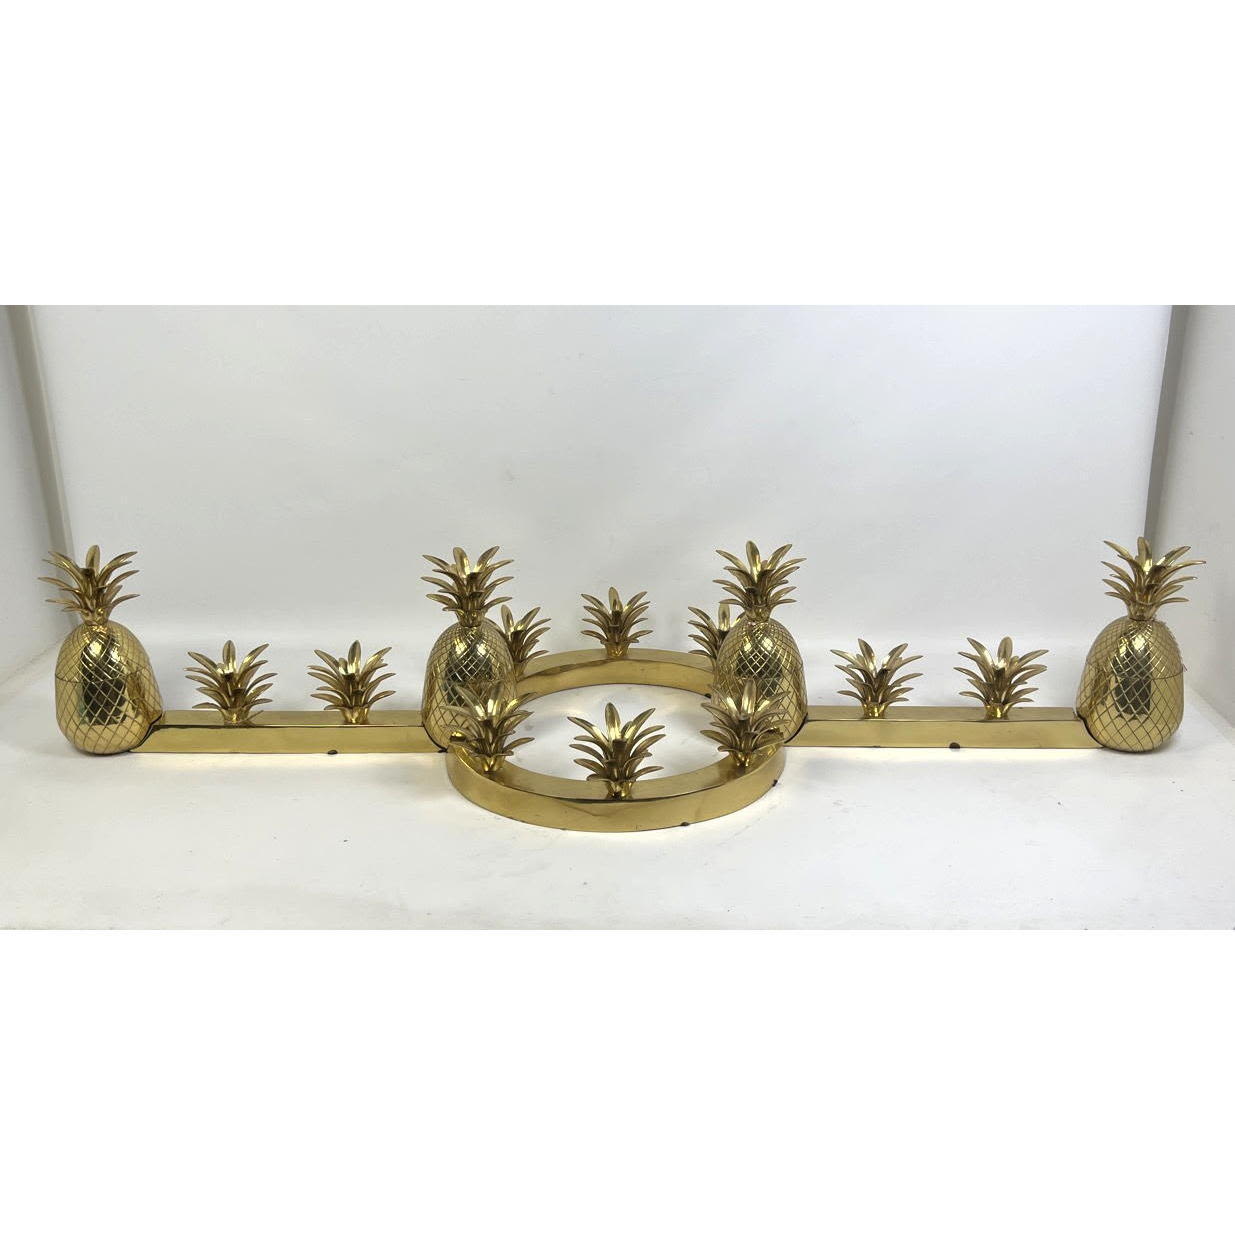 8pc Brass Pineapple and Floral